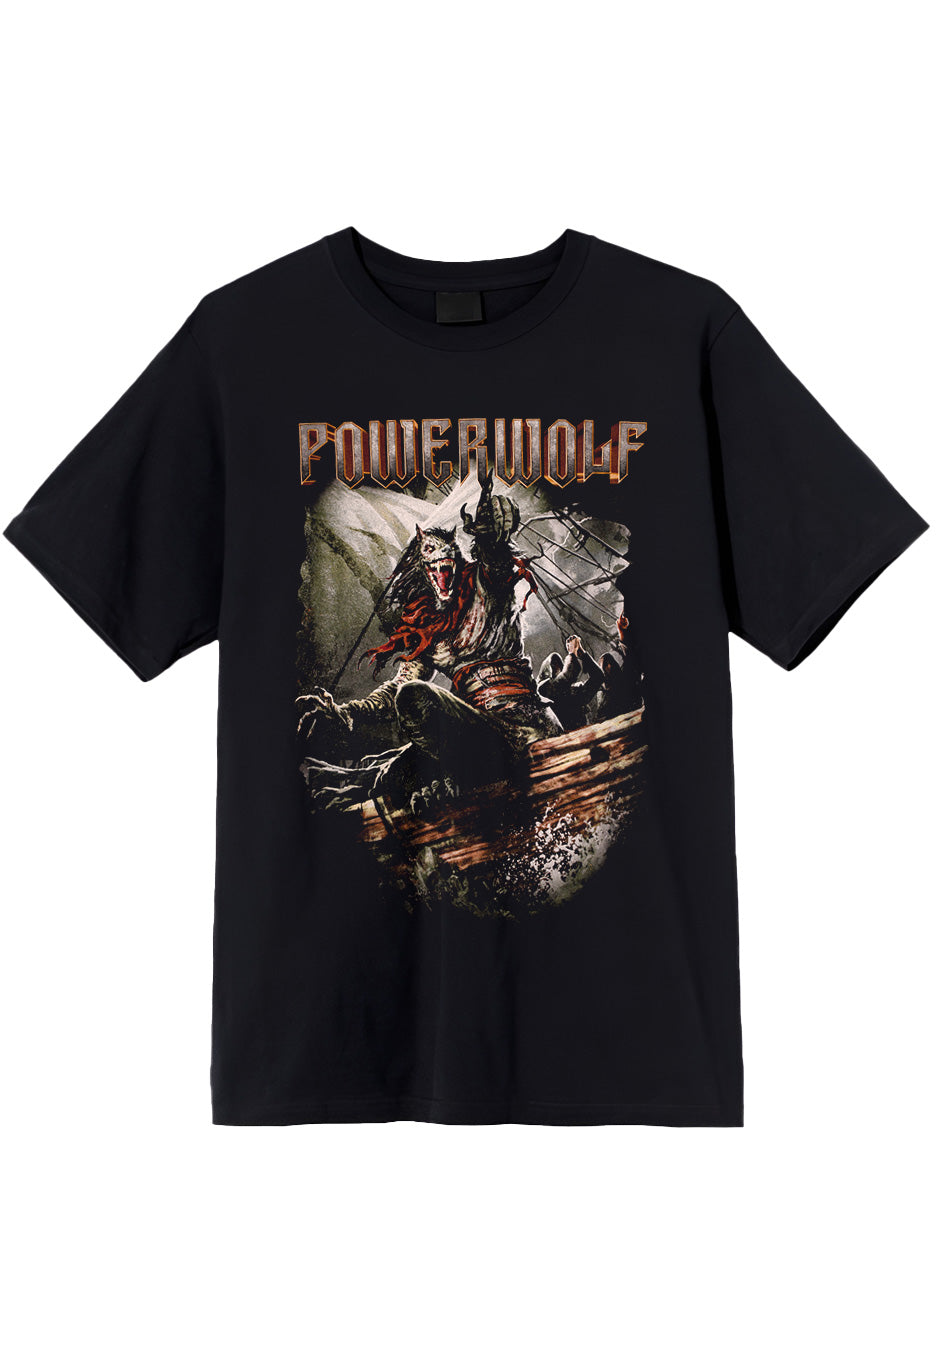 Powerwolf - Sainted By The Storm - T-Shirt